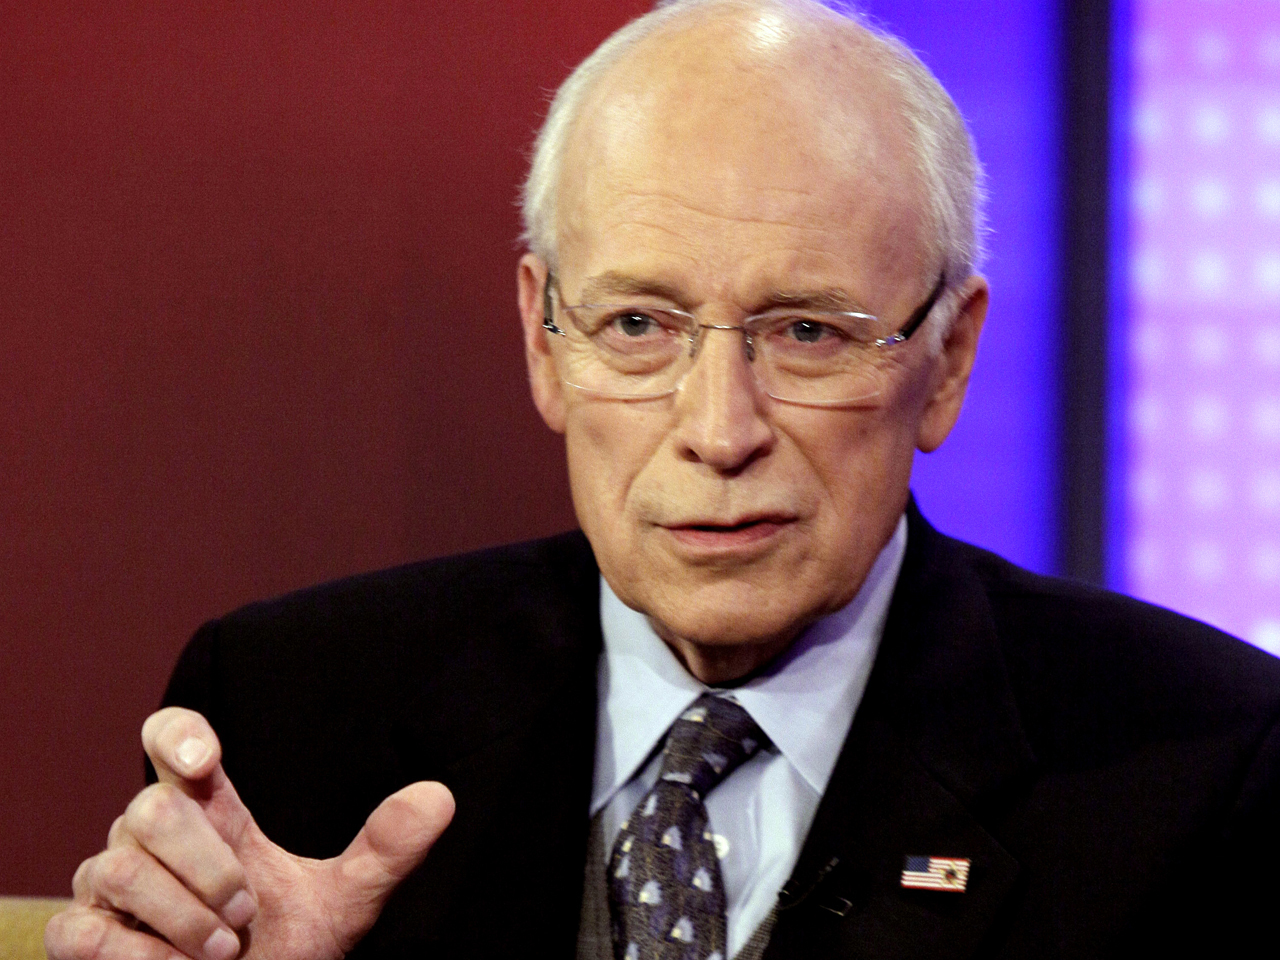 dick How cheney is old